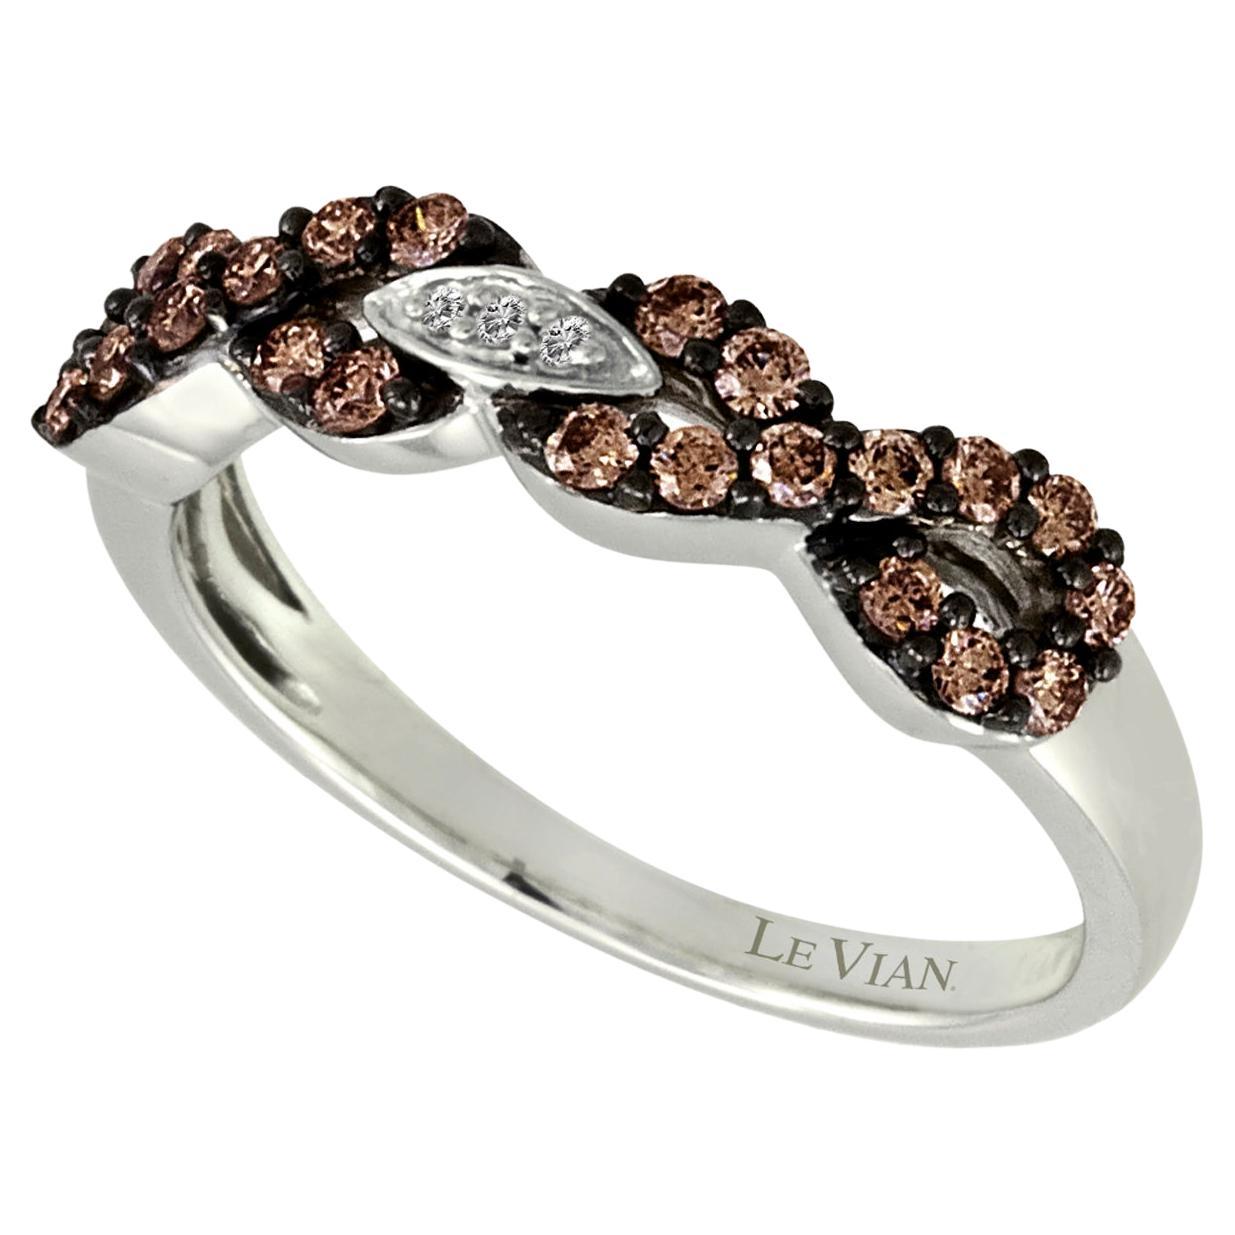 Levian Ring Band Chocolate White Diamond in 14K White Gold 3 8Cts